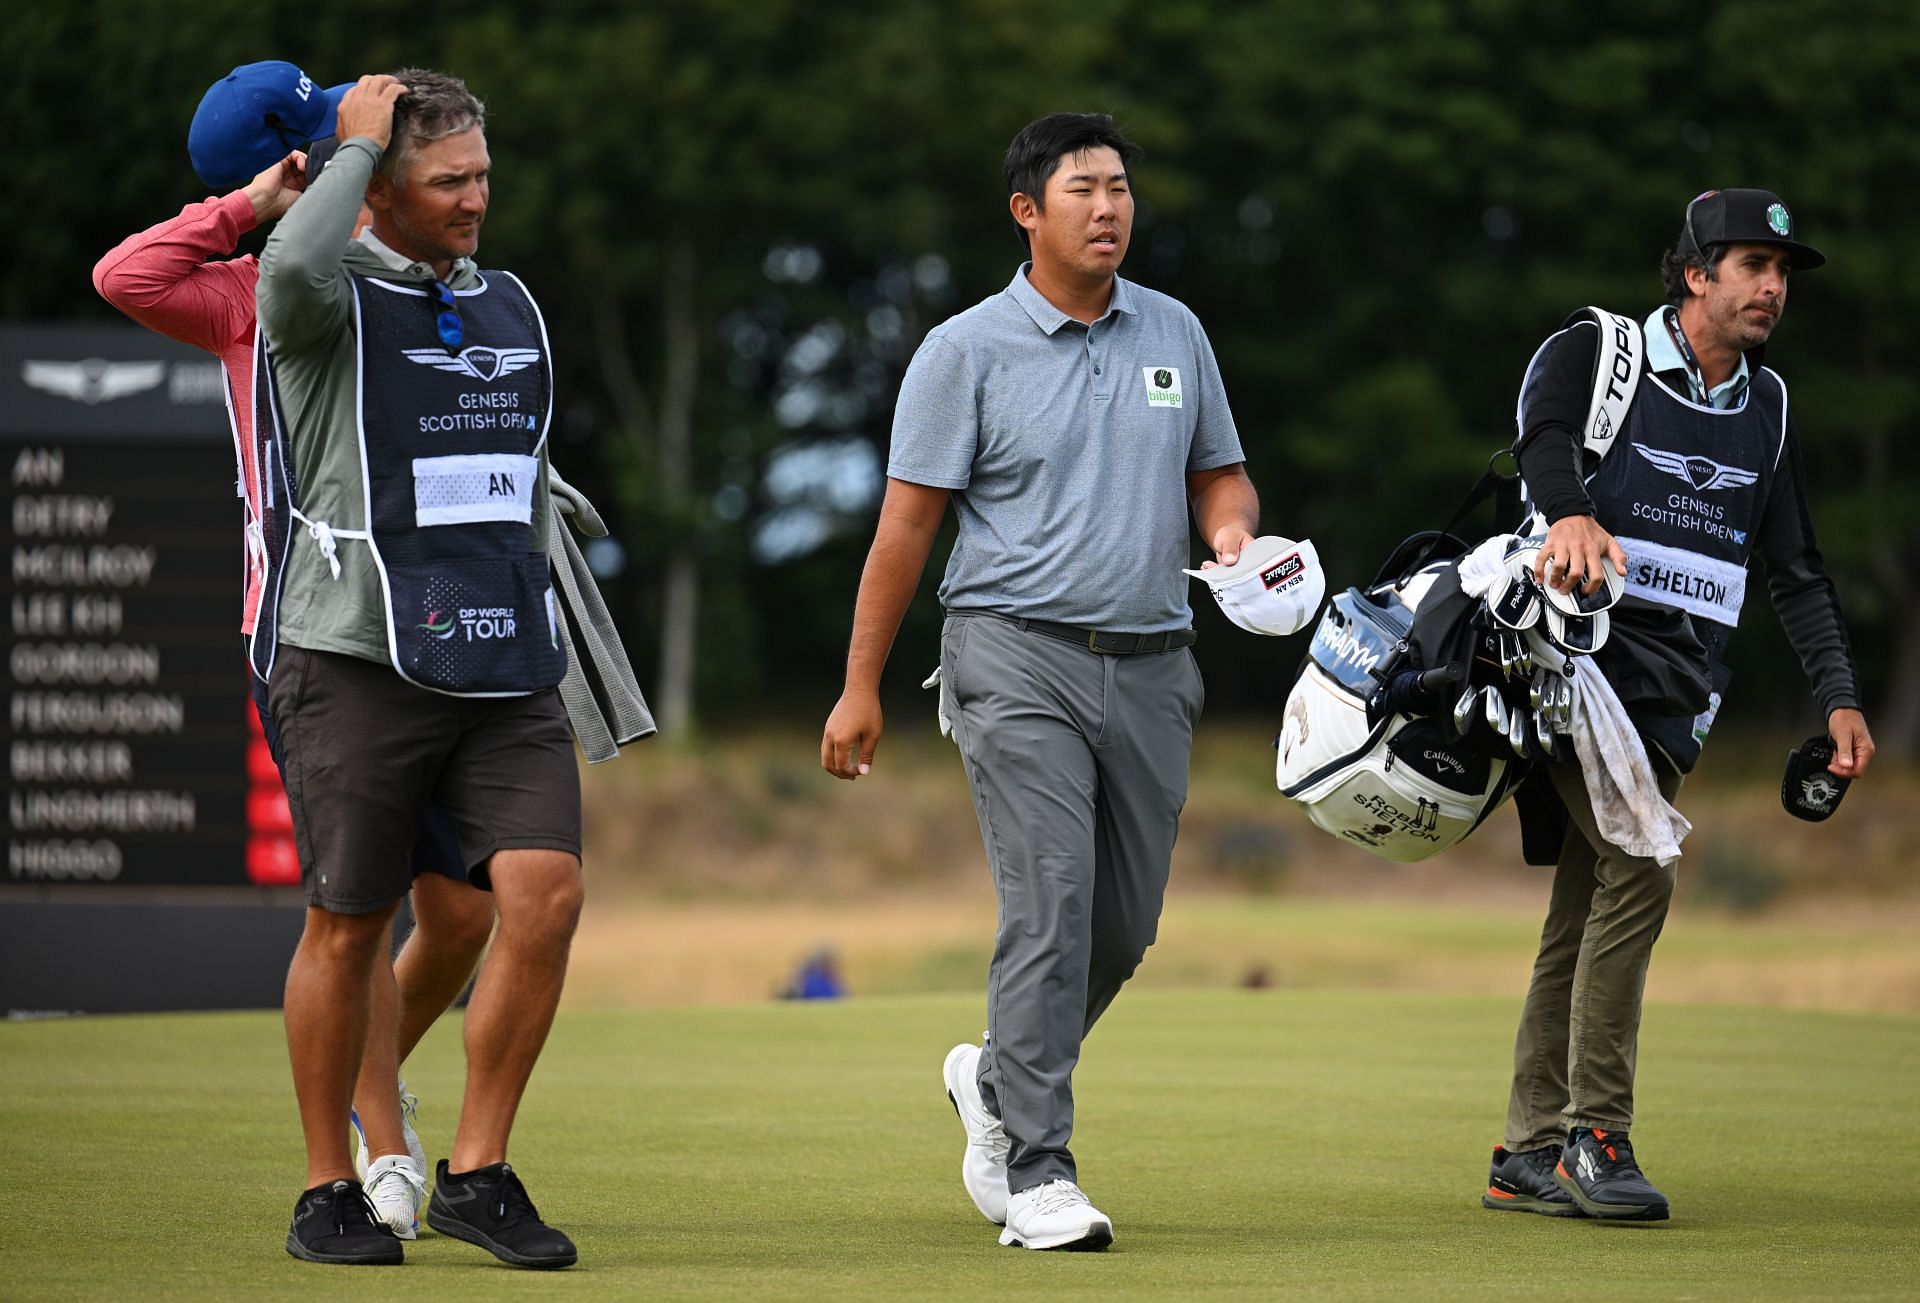 Byeong Hun An of South Korea walks off the 9th green during Day One of the Genesis Scottish Open at The Renaissance Club